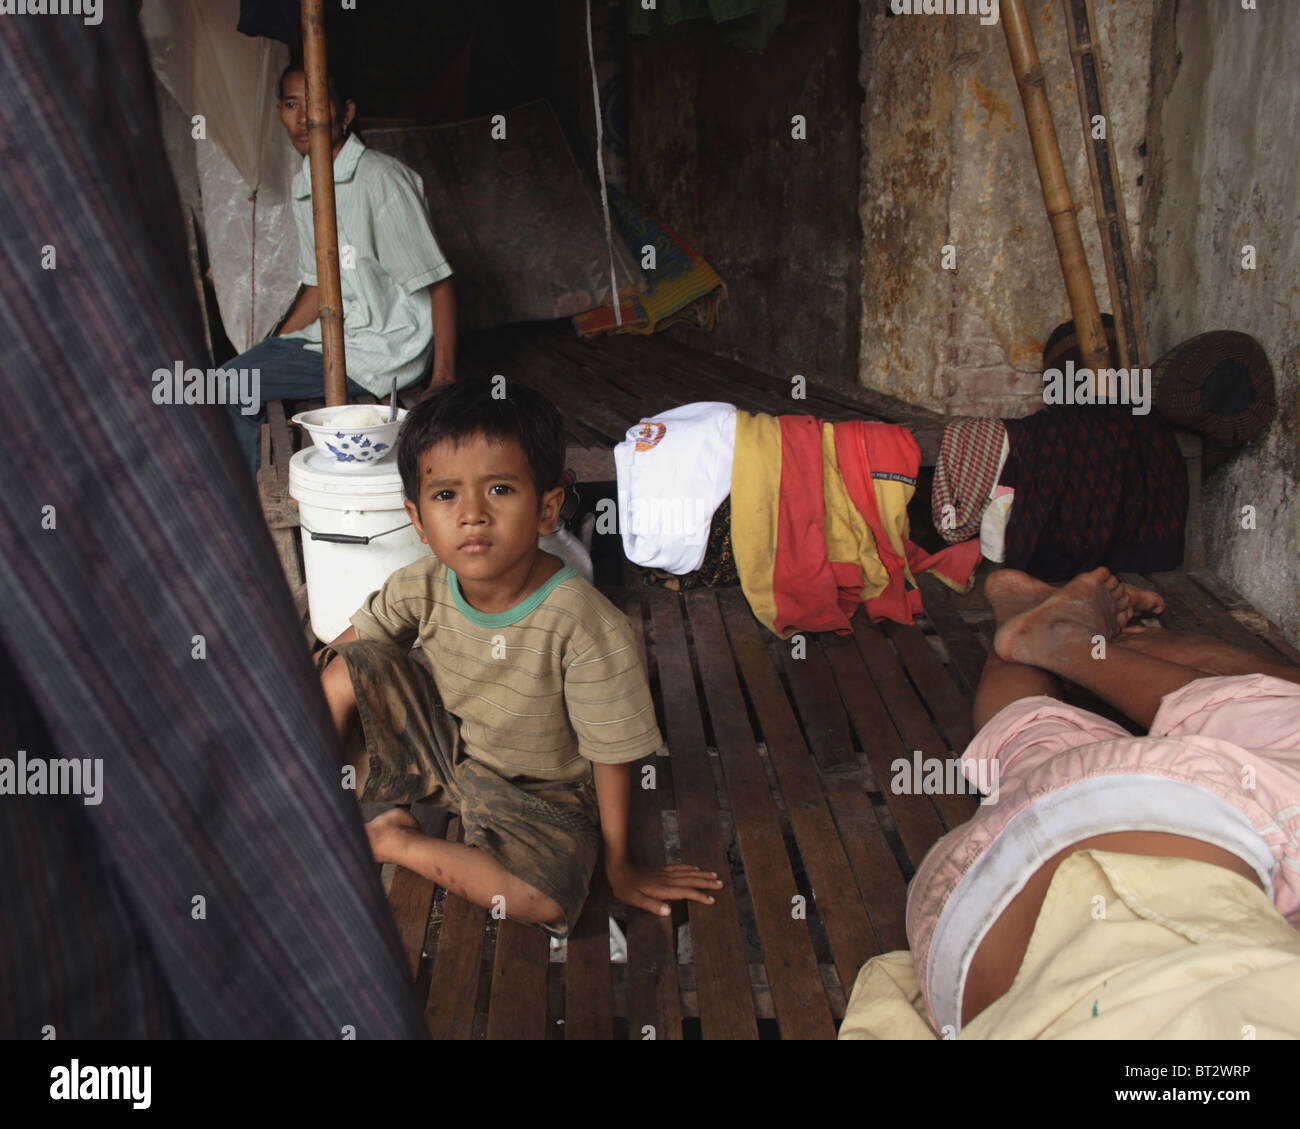 A young child laborer boy living in poverty is sitting on a wooden bed while another boy is sleeping in Kampong Cham, Cambodia. Stock Photo